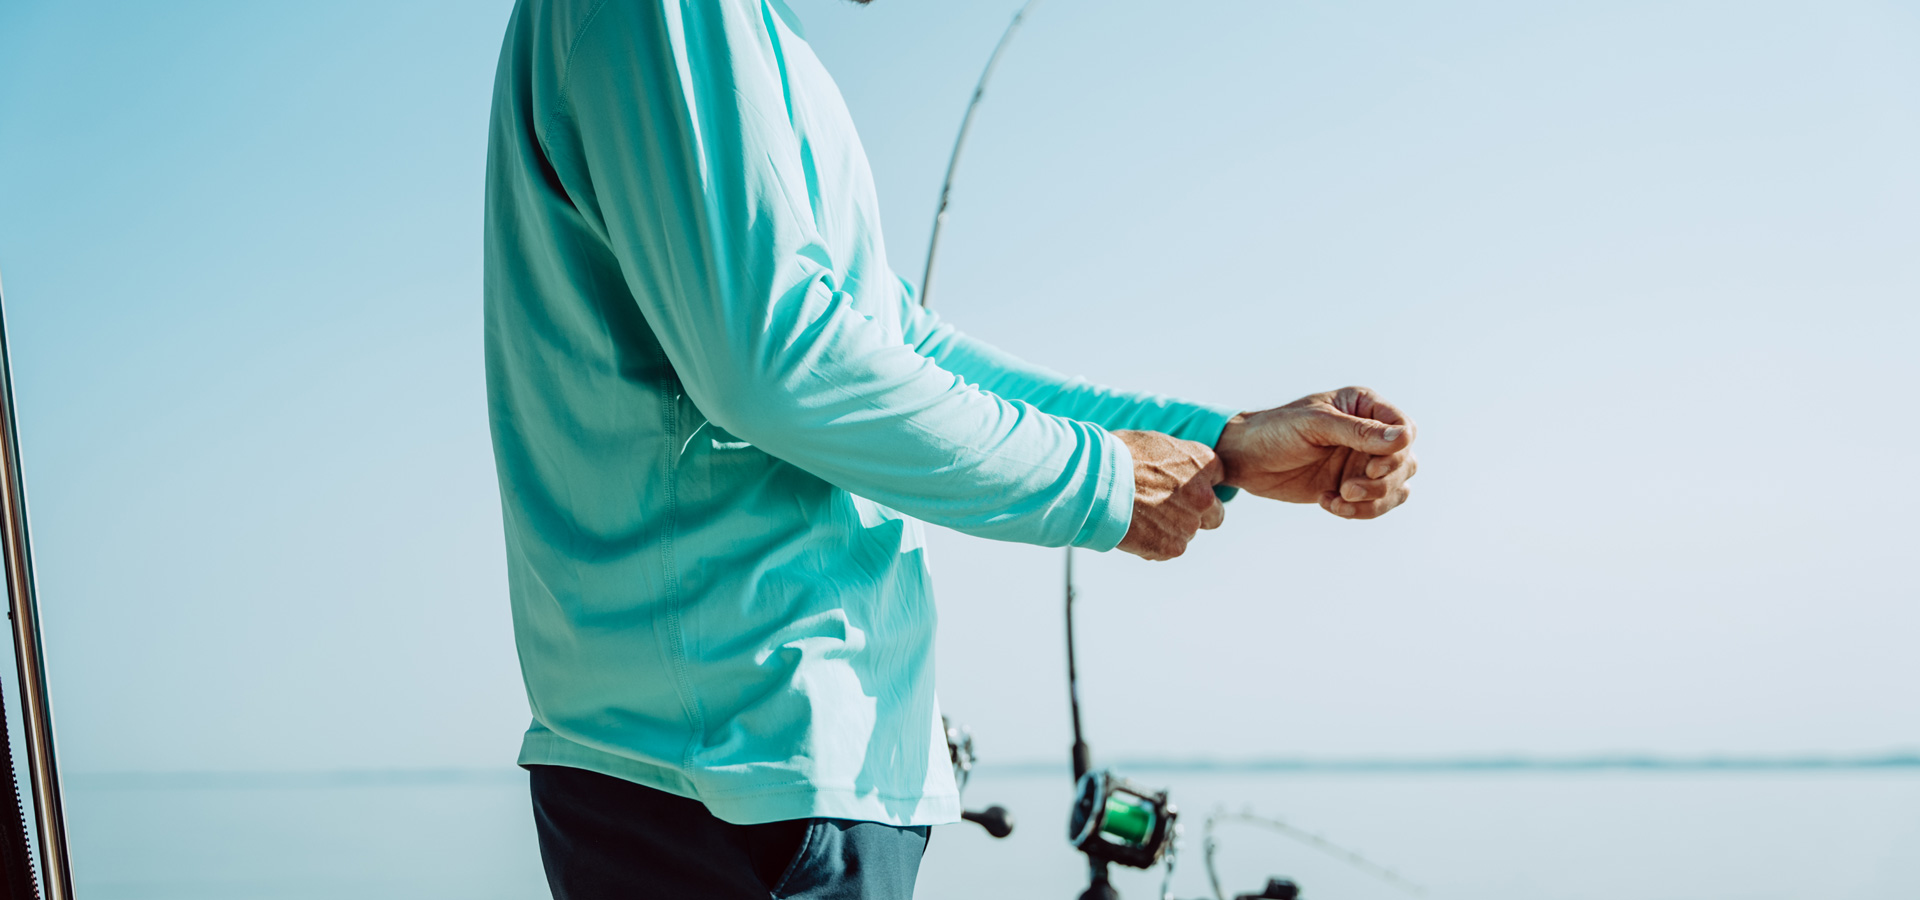 Long-Sleeve Fishing Apparel and Clothes by Whitewater